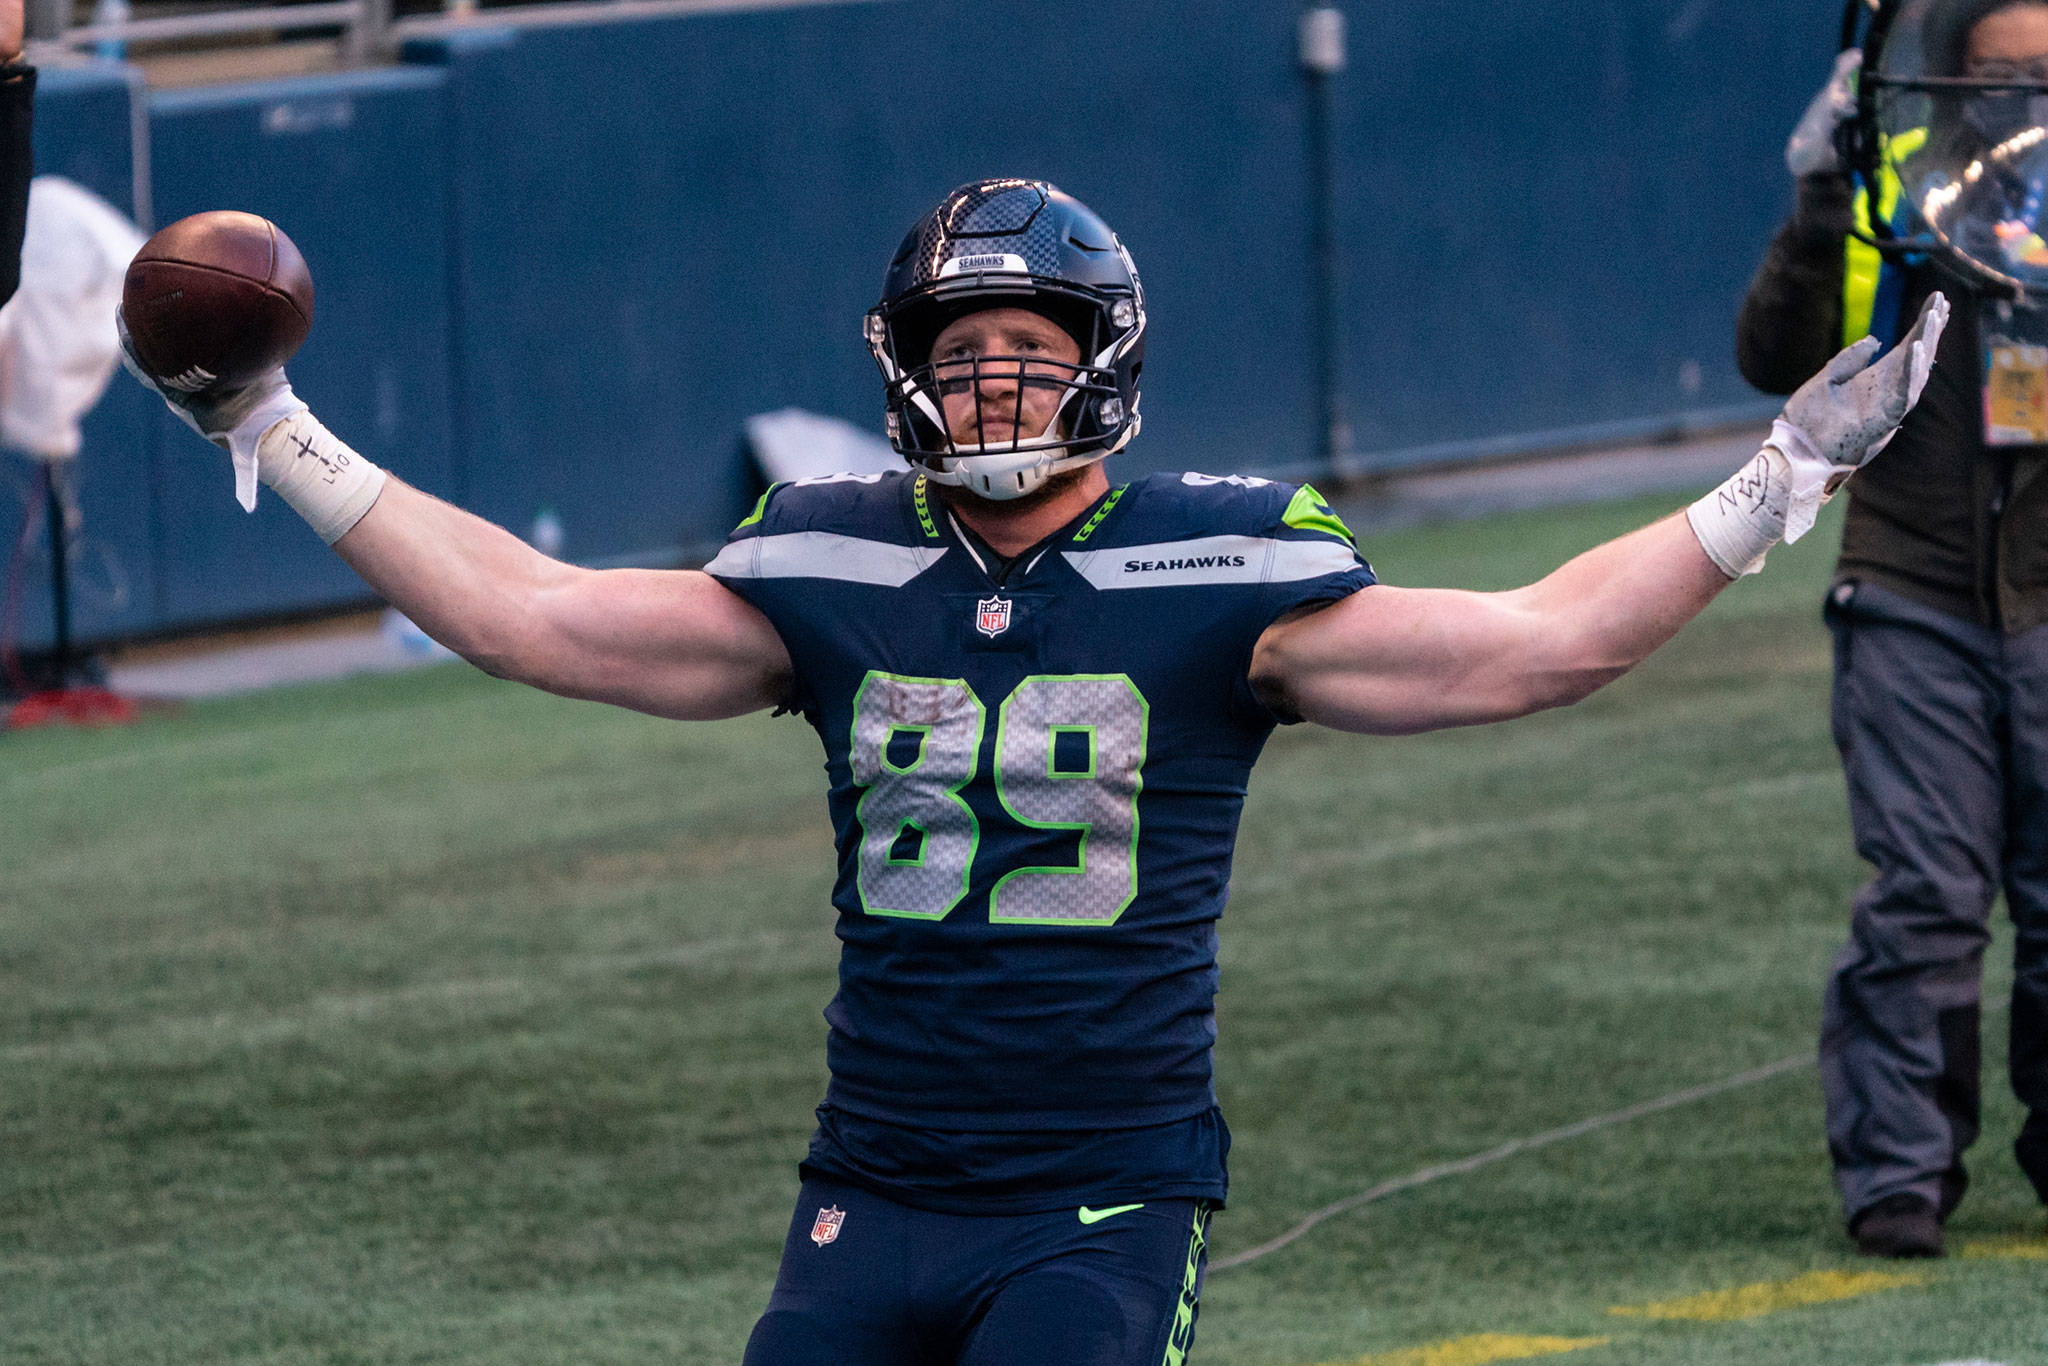 Seahawks tight end Will Dissly celebrates after scoring a touchdown during the second half of a game against the Jets on Dec. 13, 2020, in Seattle. (AP Photo/Stephen Brashear)